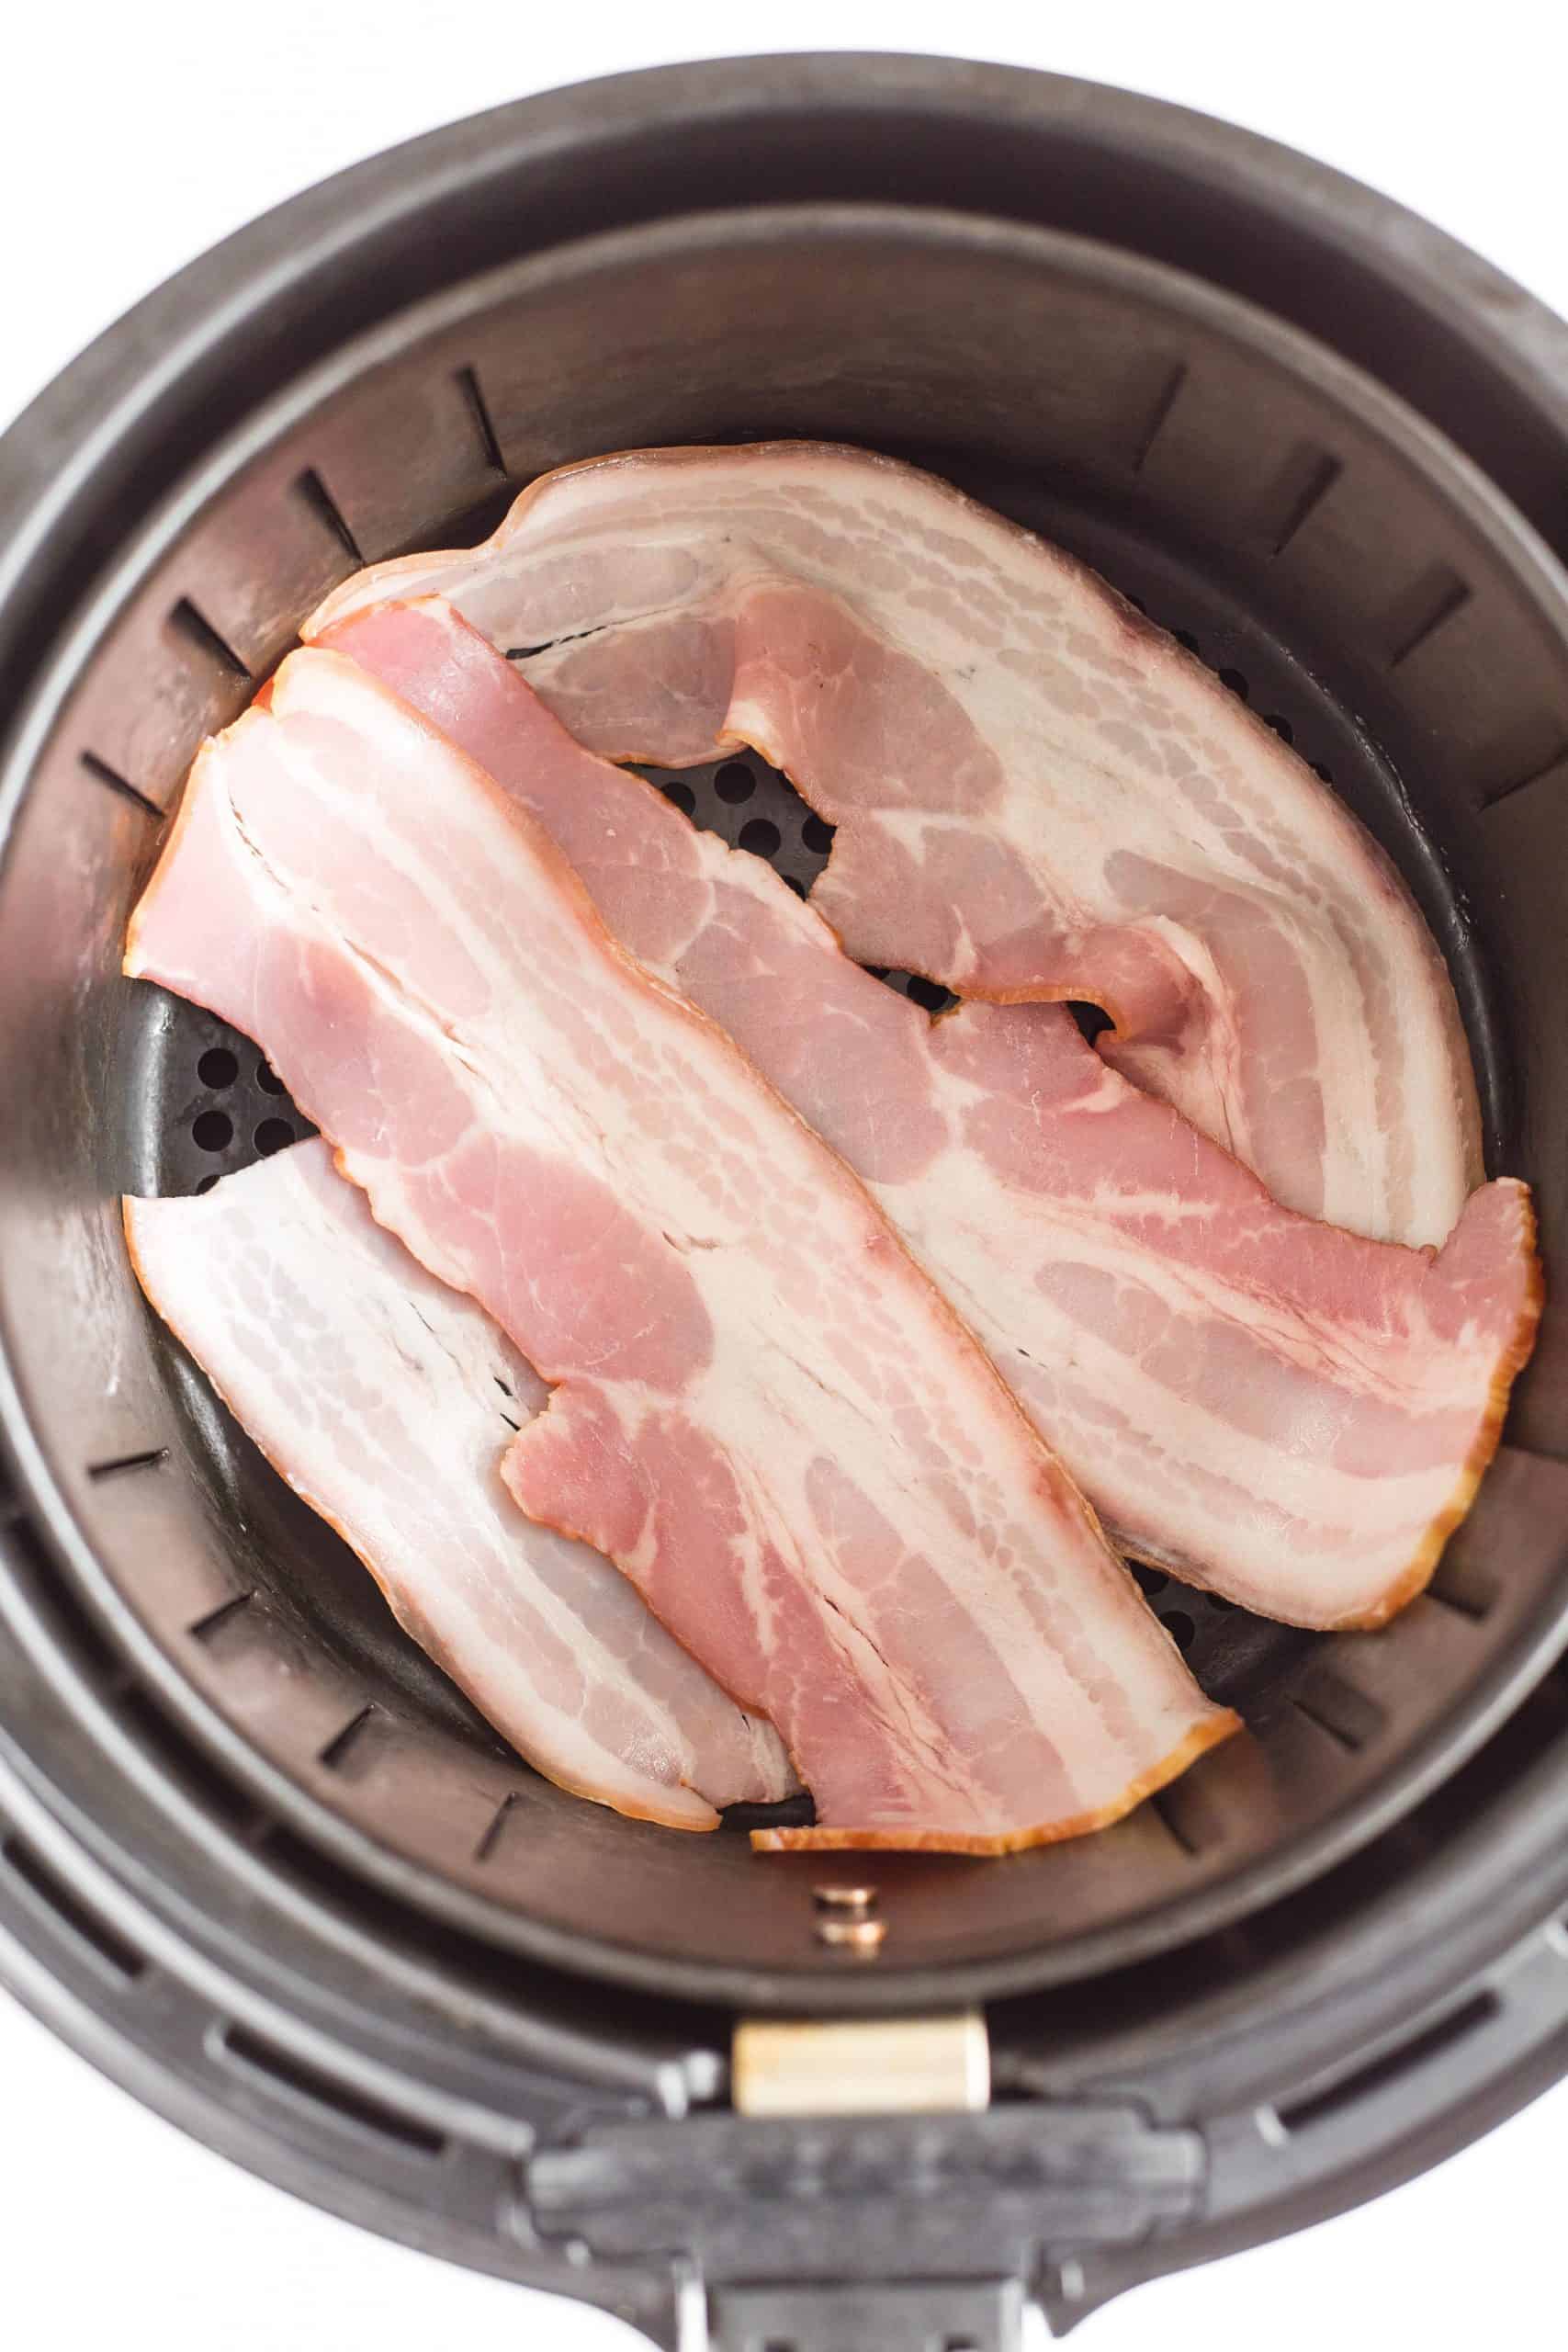 Uncooked bacon slices in an air fryer basket.